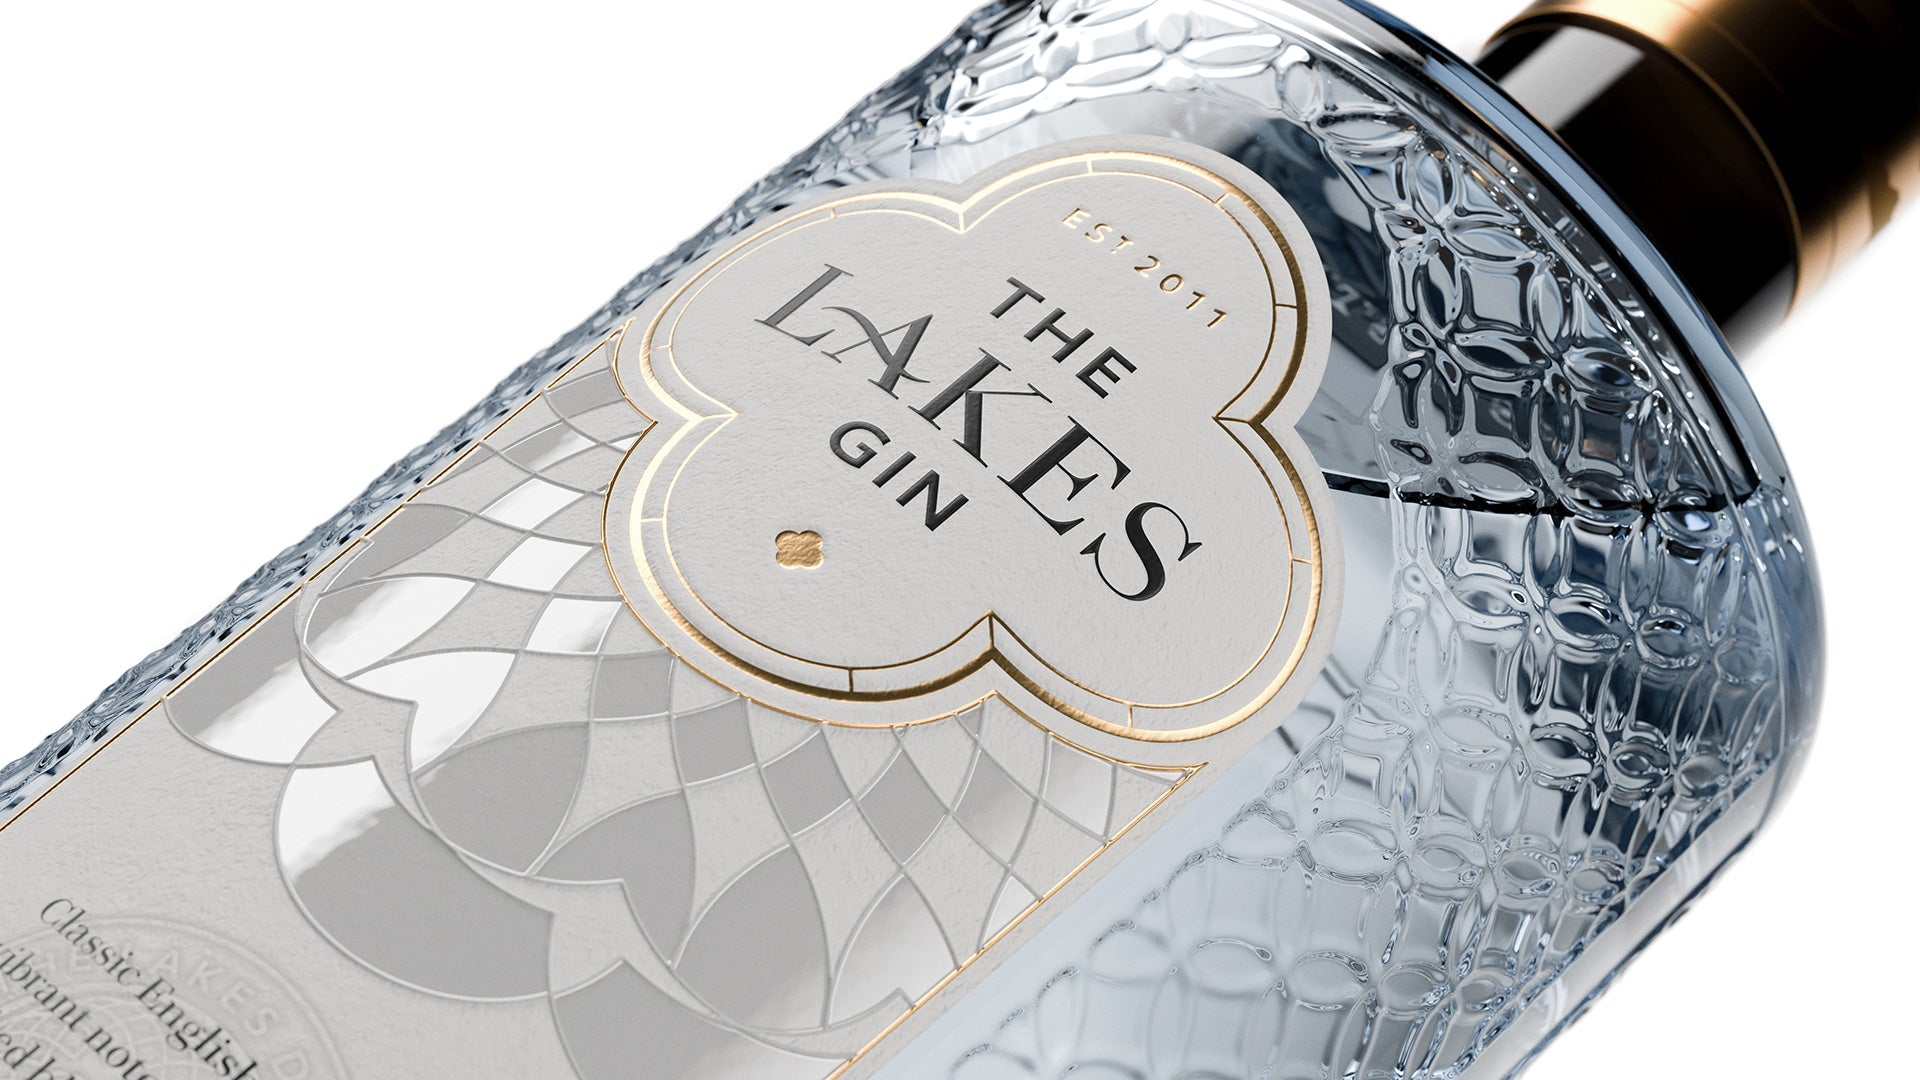 Behind the scenes: The Lakes Gin